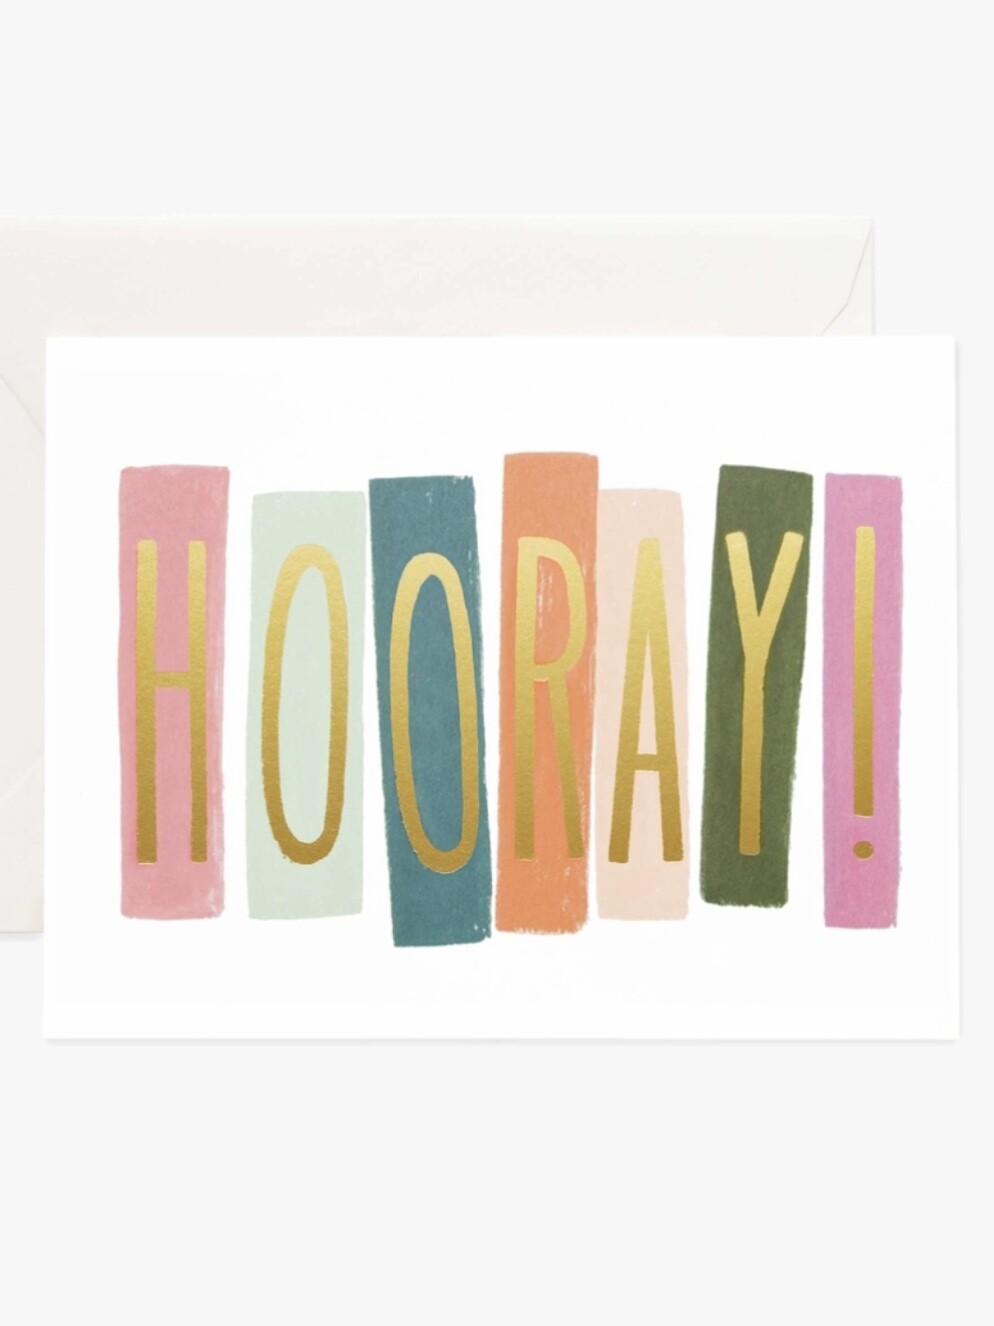 Hooray Greeting Card - Rifle Paper Co. RPC158